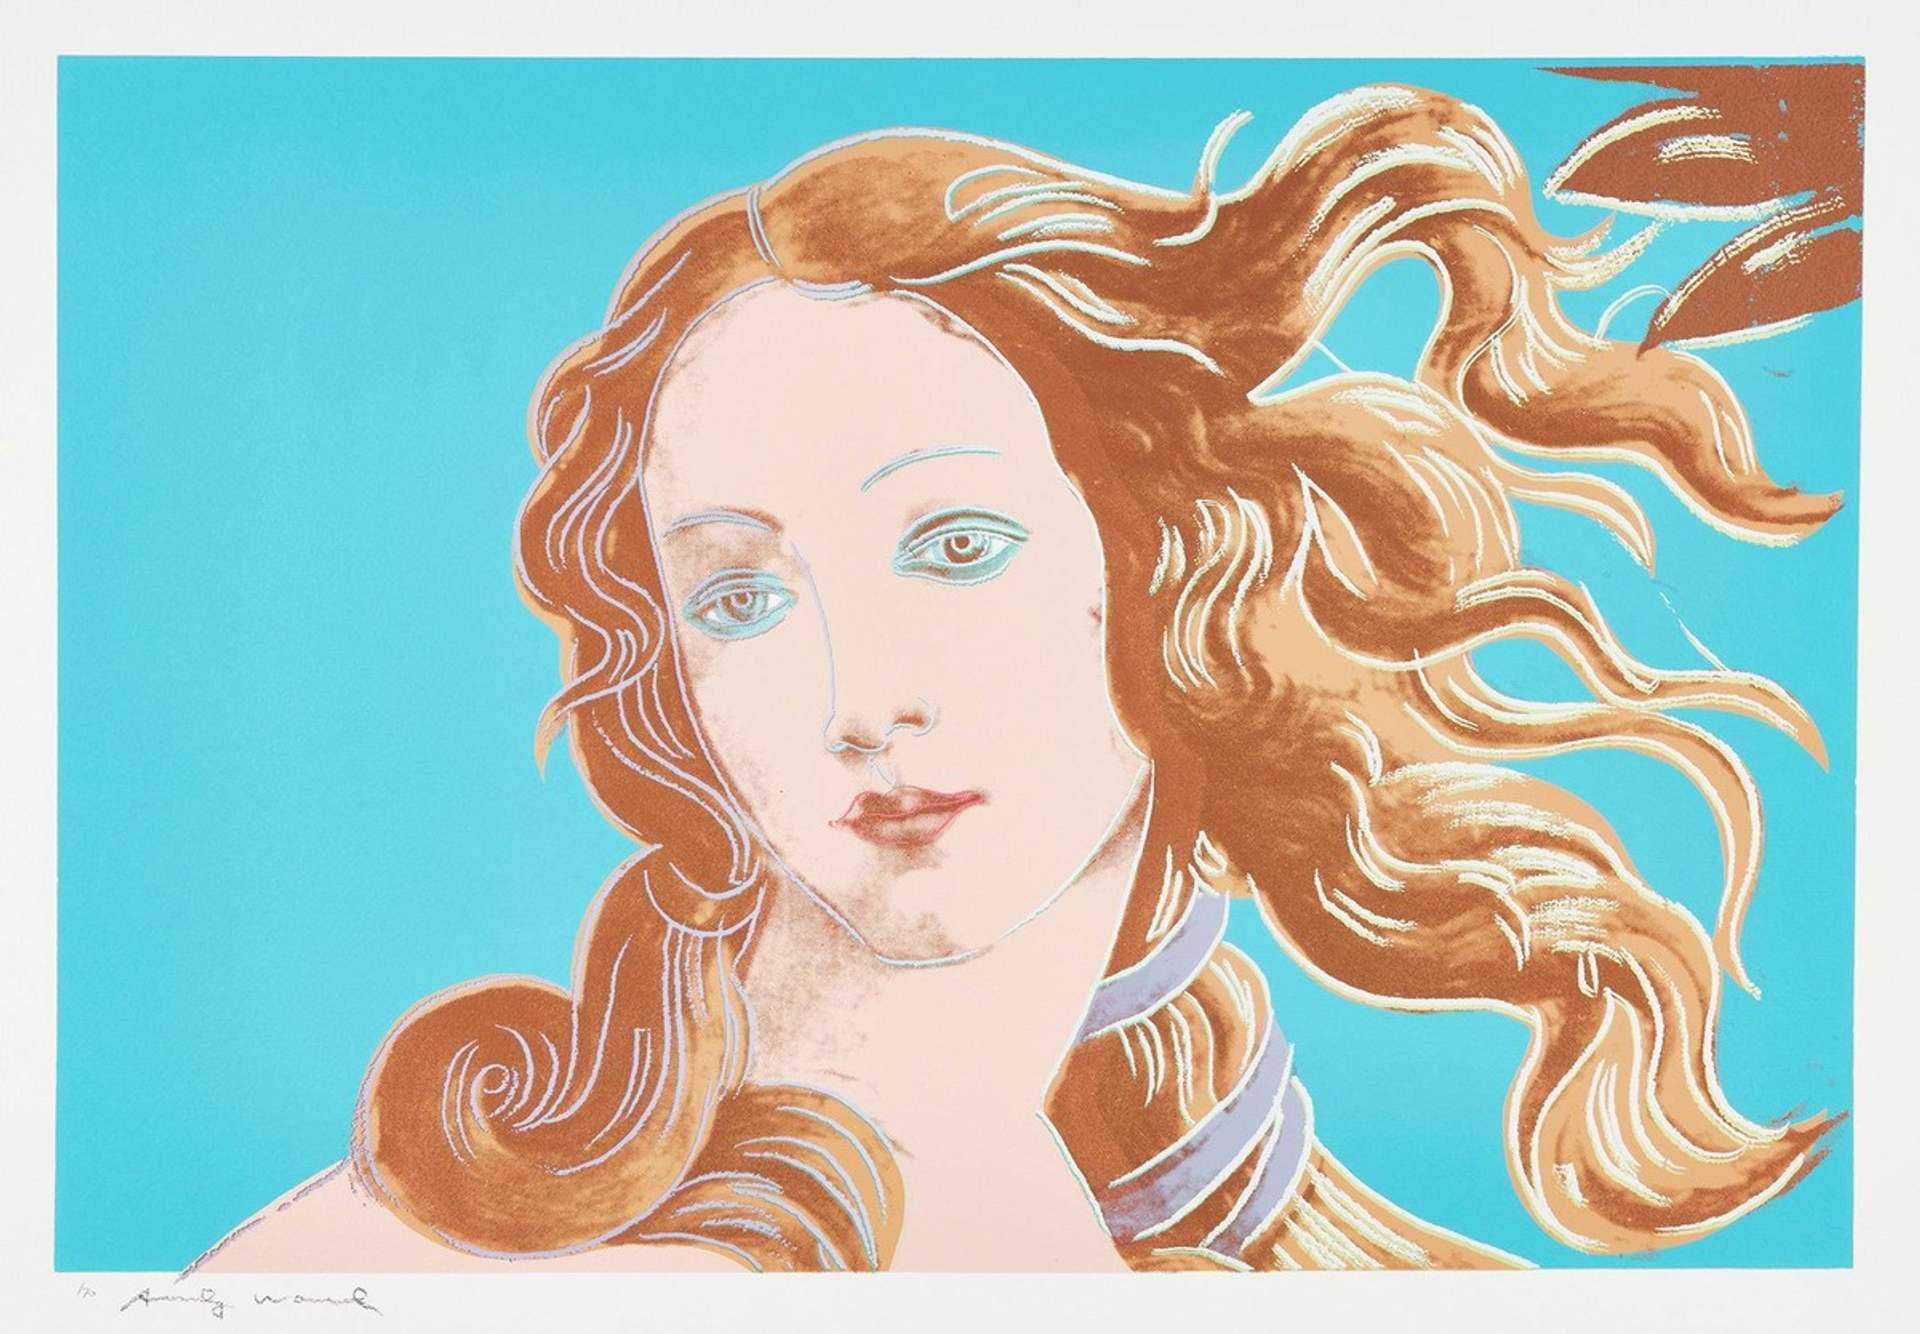 Details Of Renaissance Paintings (Sandro Botticelli, Birth Of Venus, 1482) (F. & S. II.319) by Andy Warhol